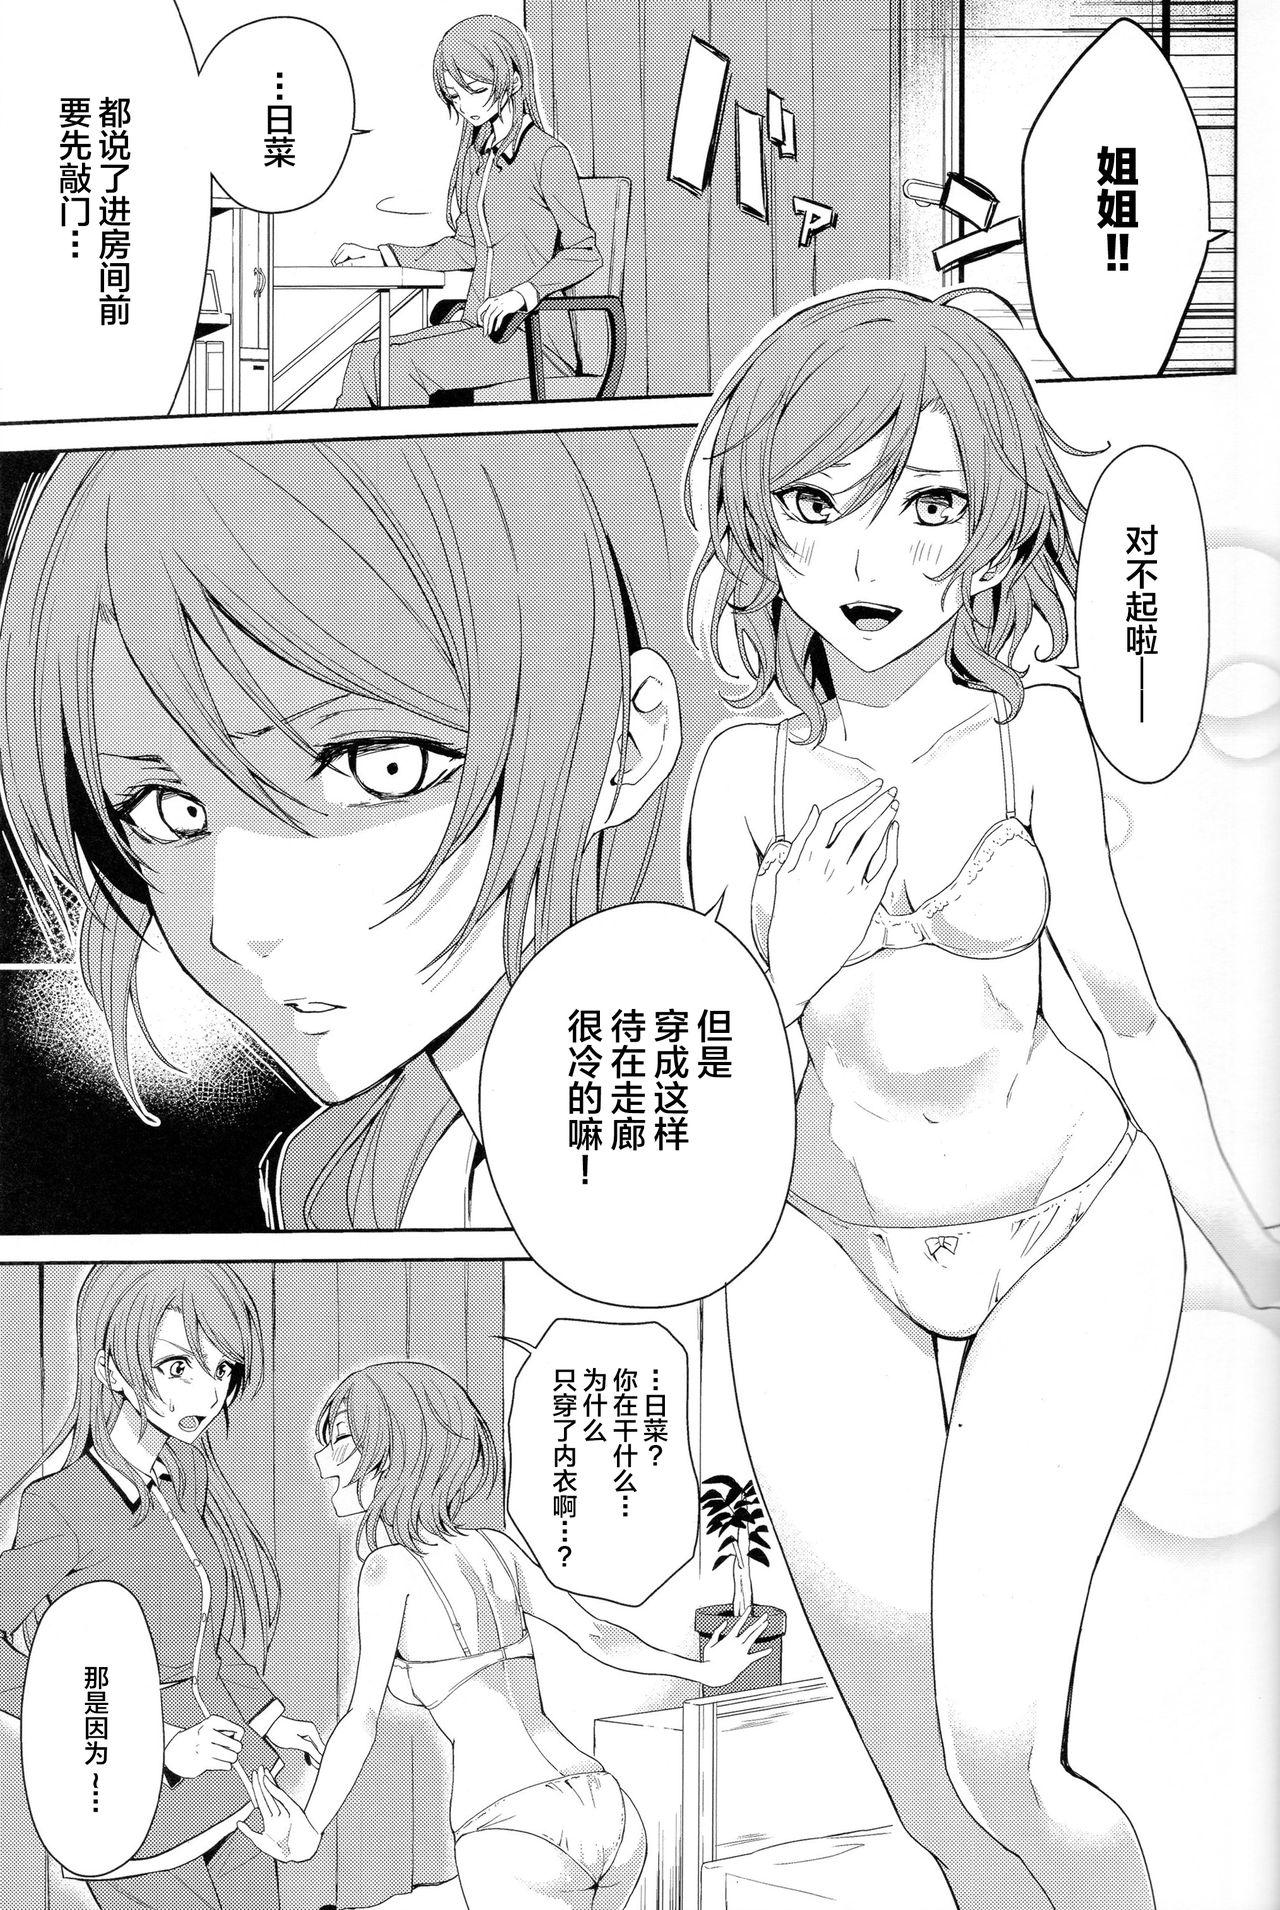 Wet Cunts Onee-chan to! - Bang dream Puto - Page 2